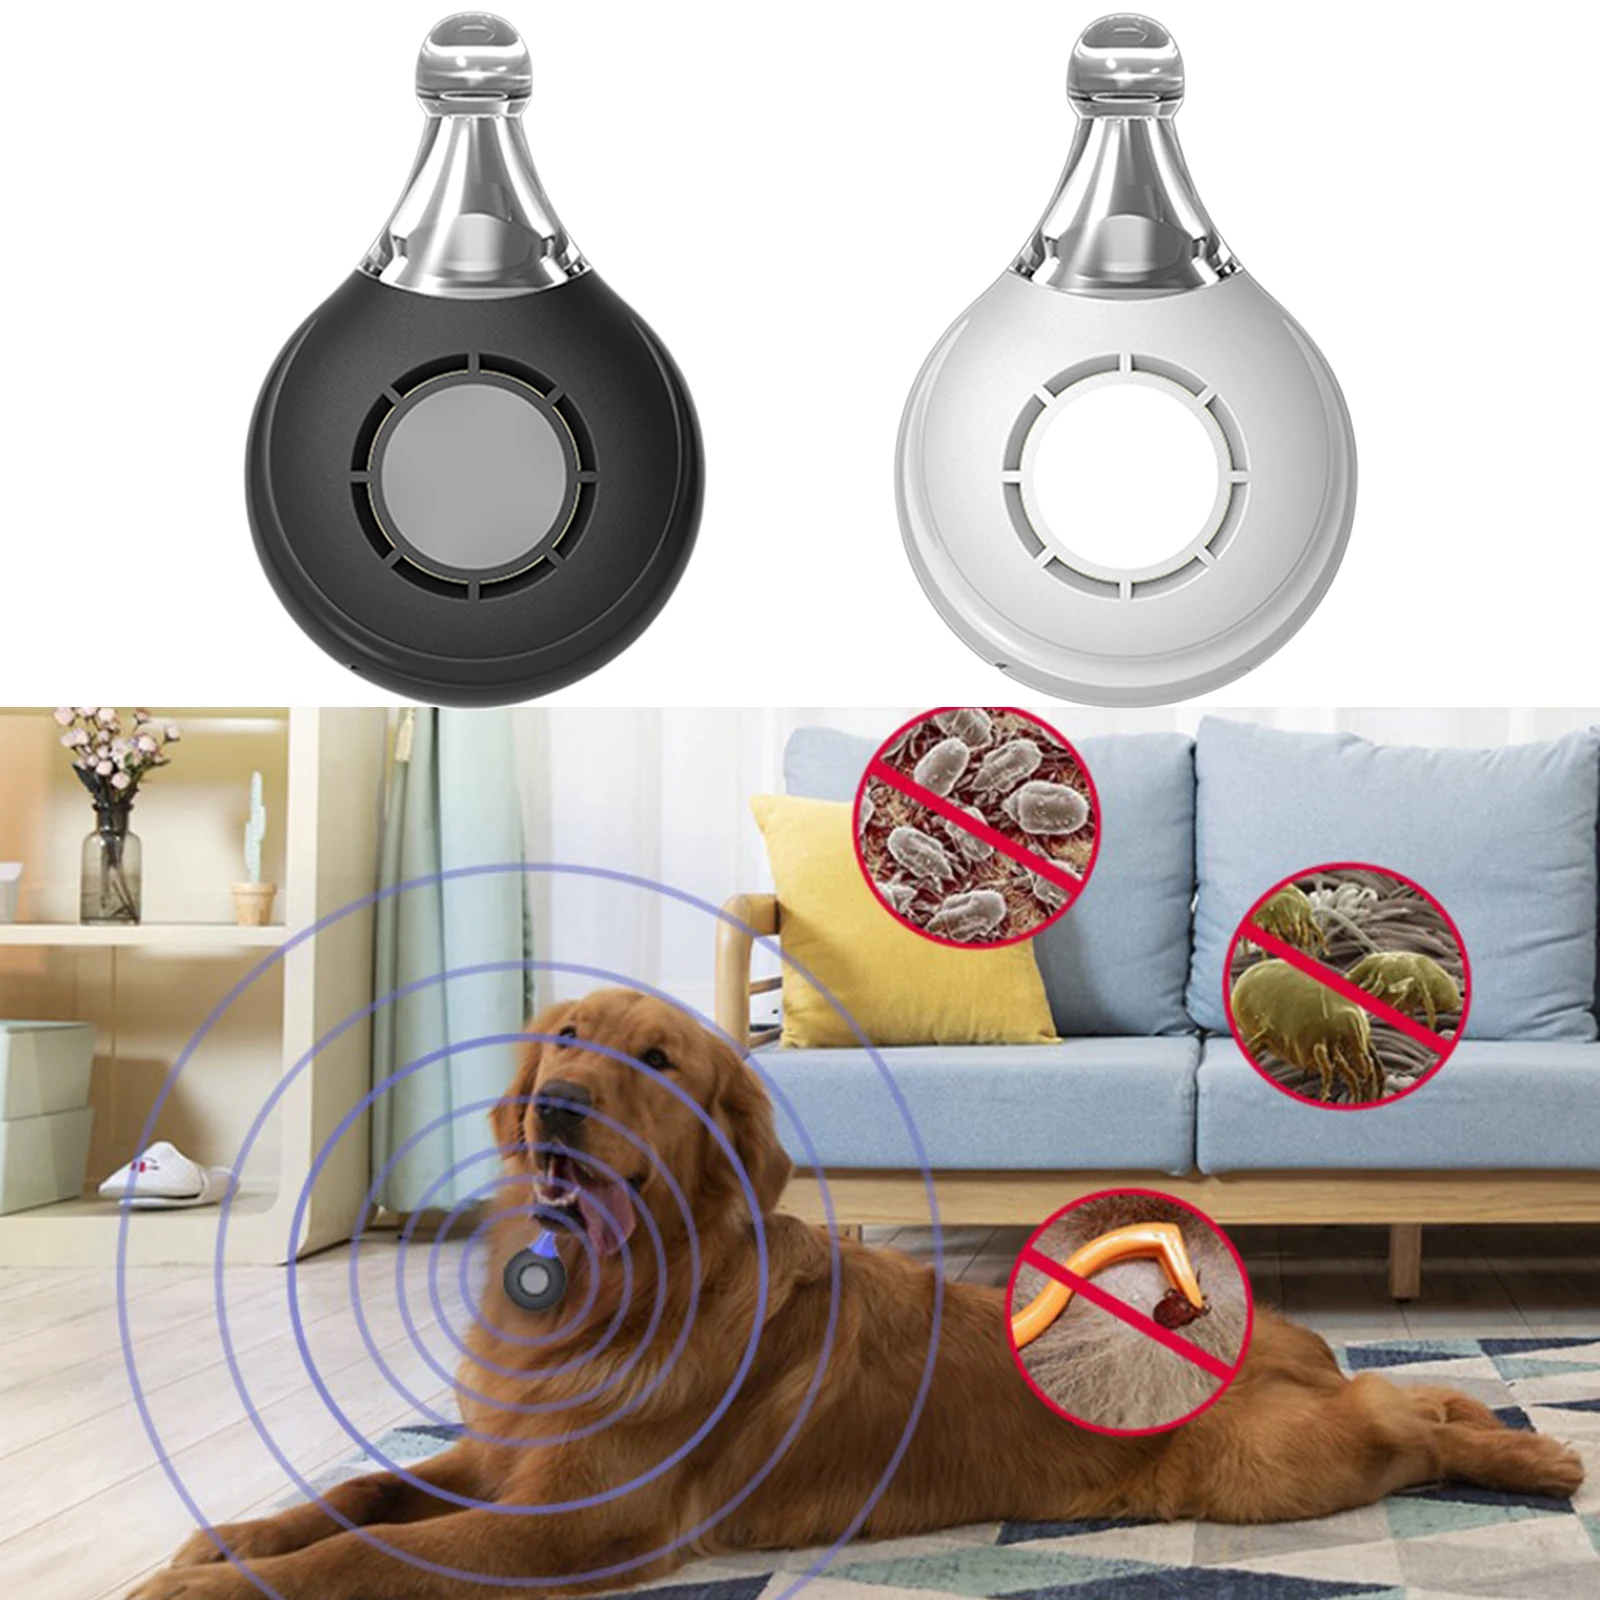 Ultrasonic Pest Repellent, Durable Mosquitoes Insects Repellent, USB Rechargeable Dogs Cats Fleas Ticks Louse Repelling Device